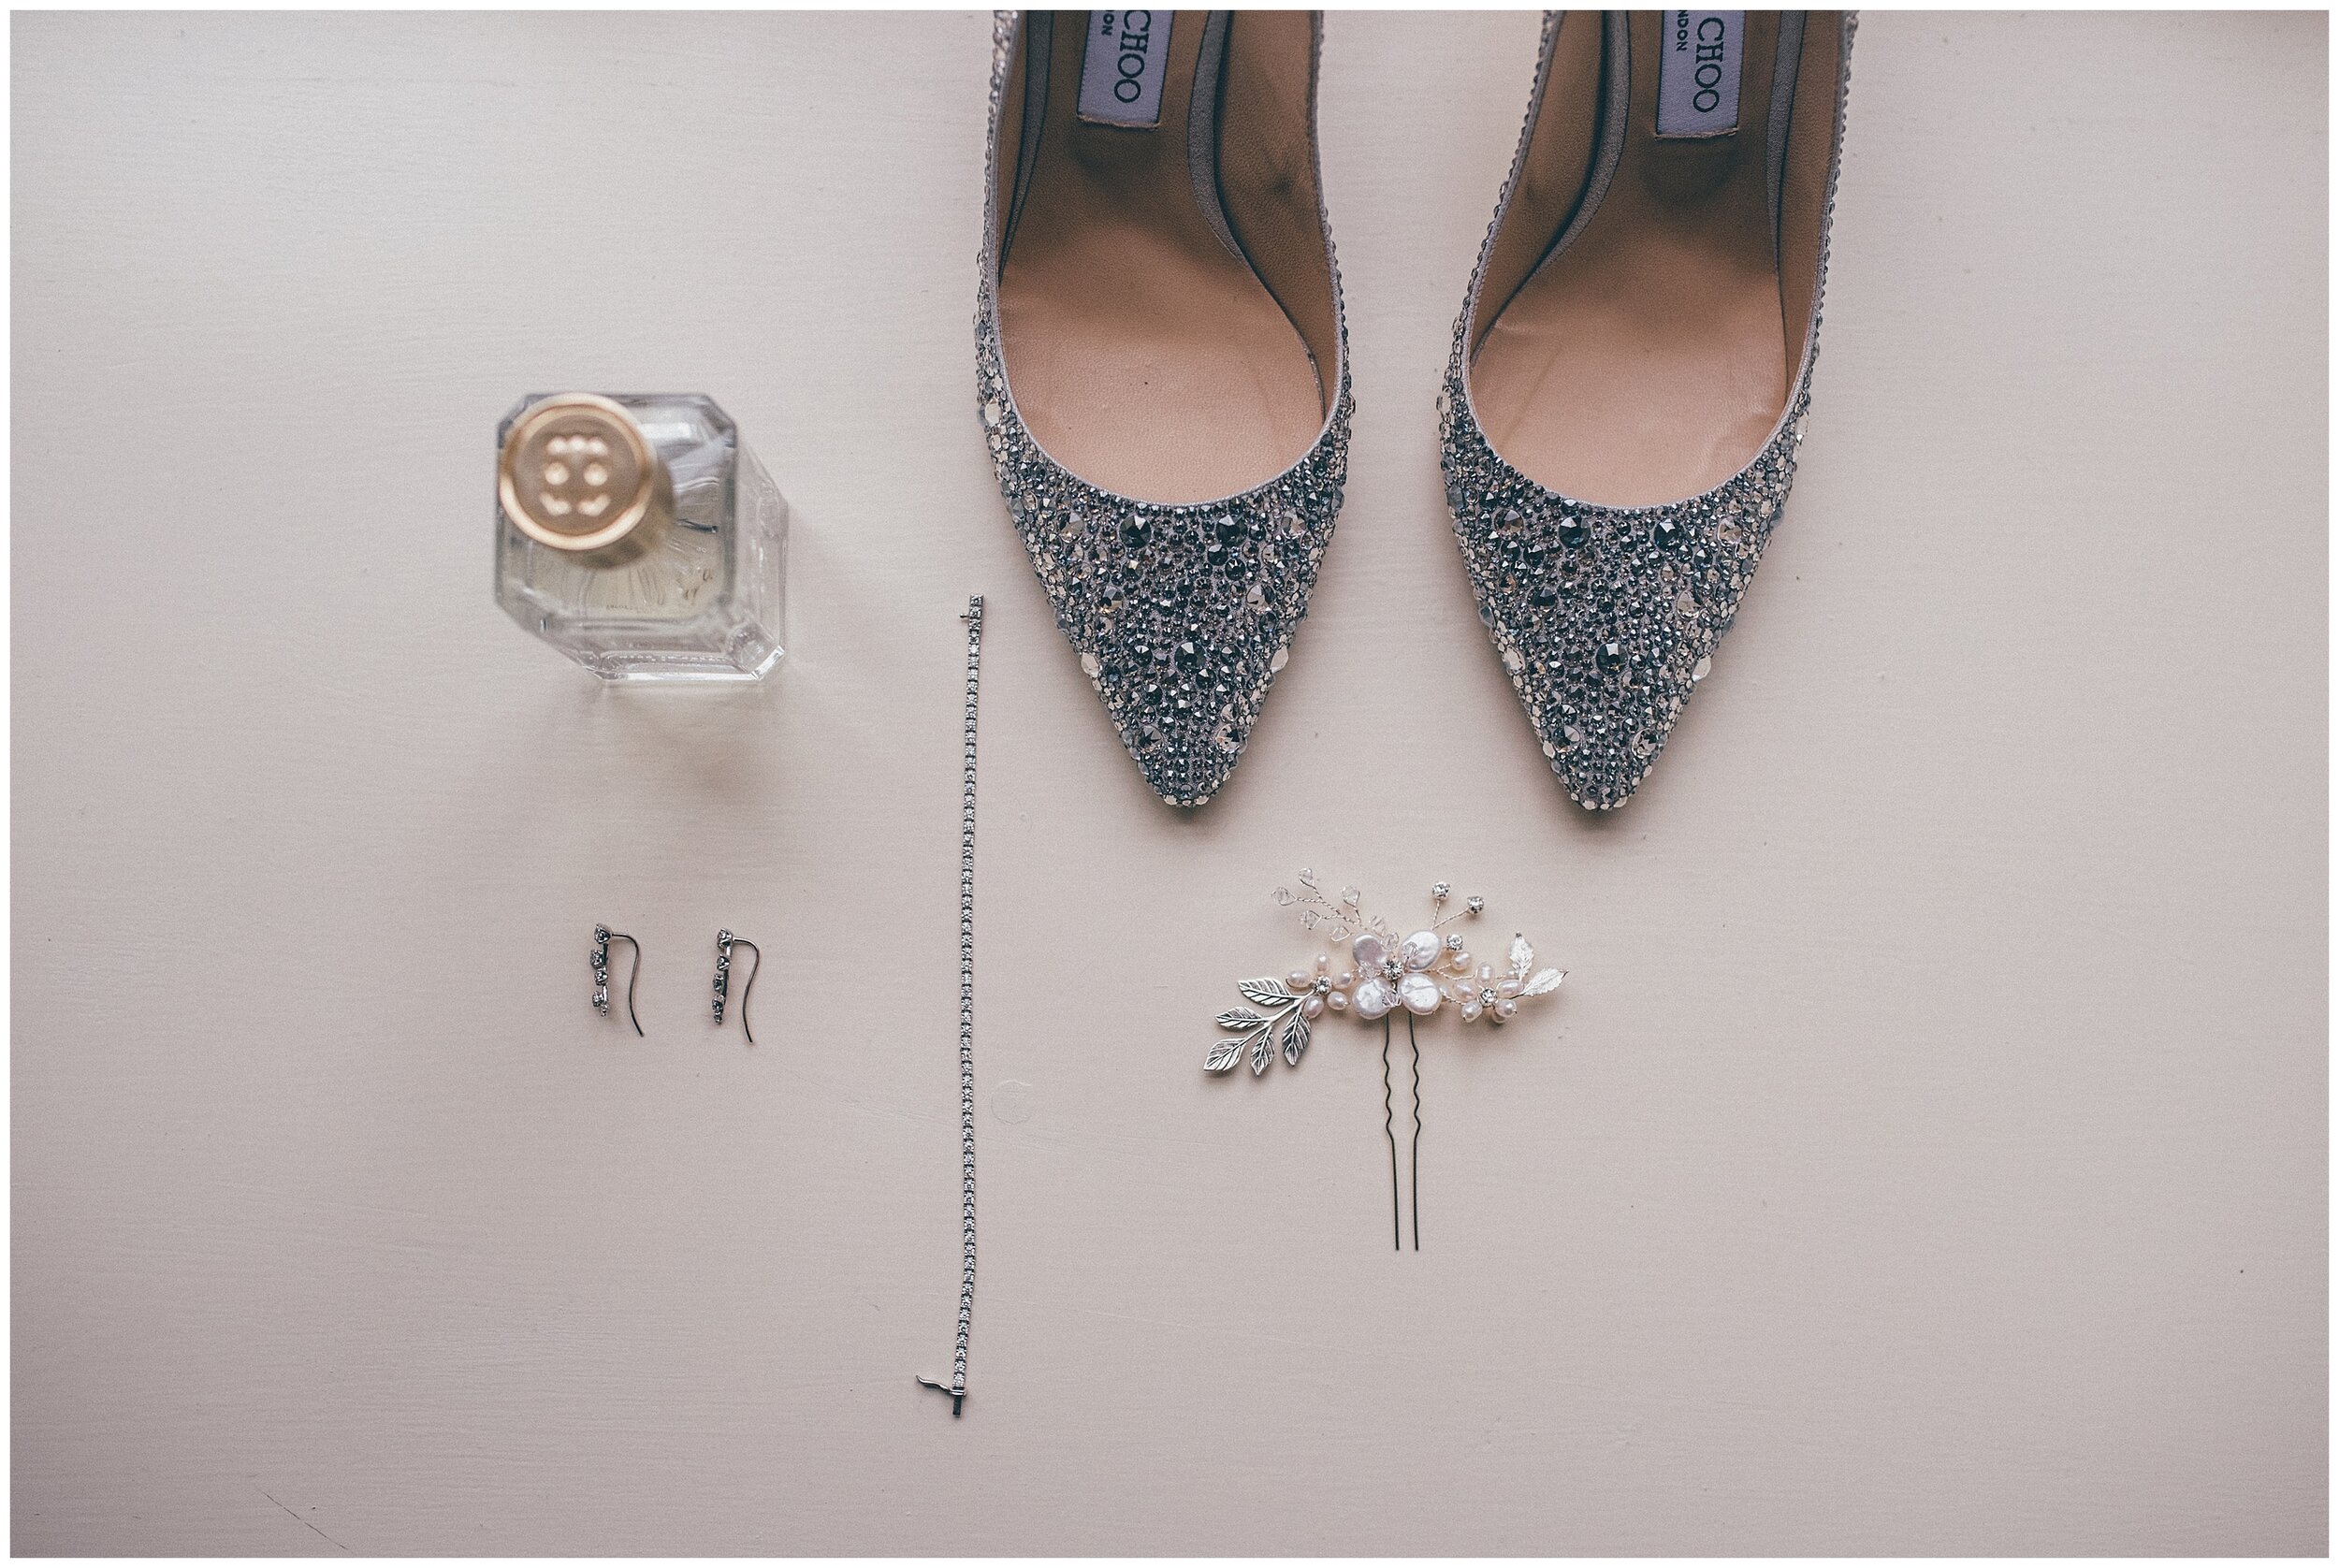 Beautiful Jimmy Choo wedding shoes and other wedding details at Lake District wedding.